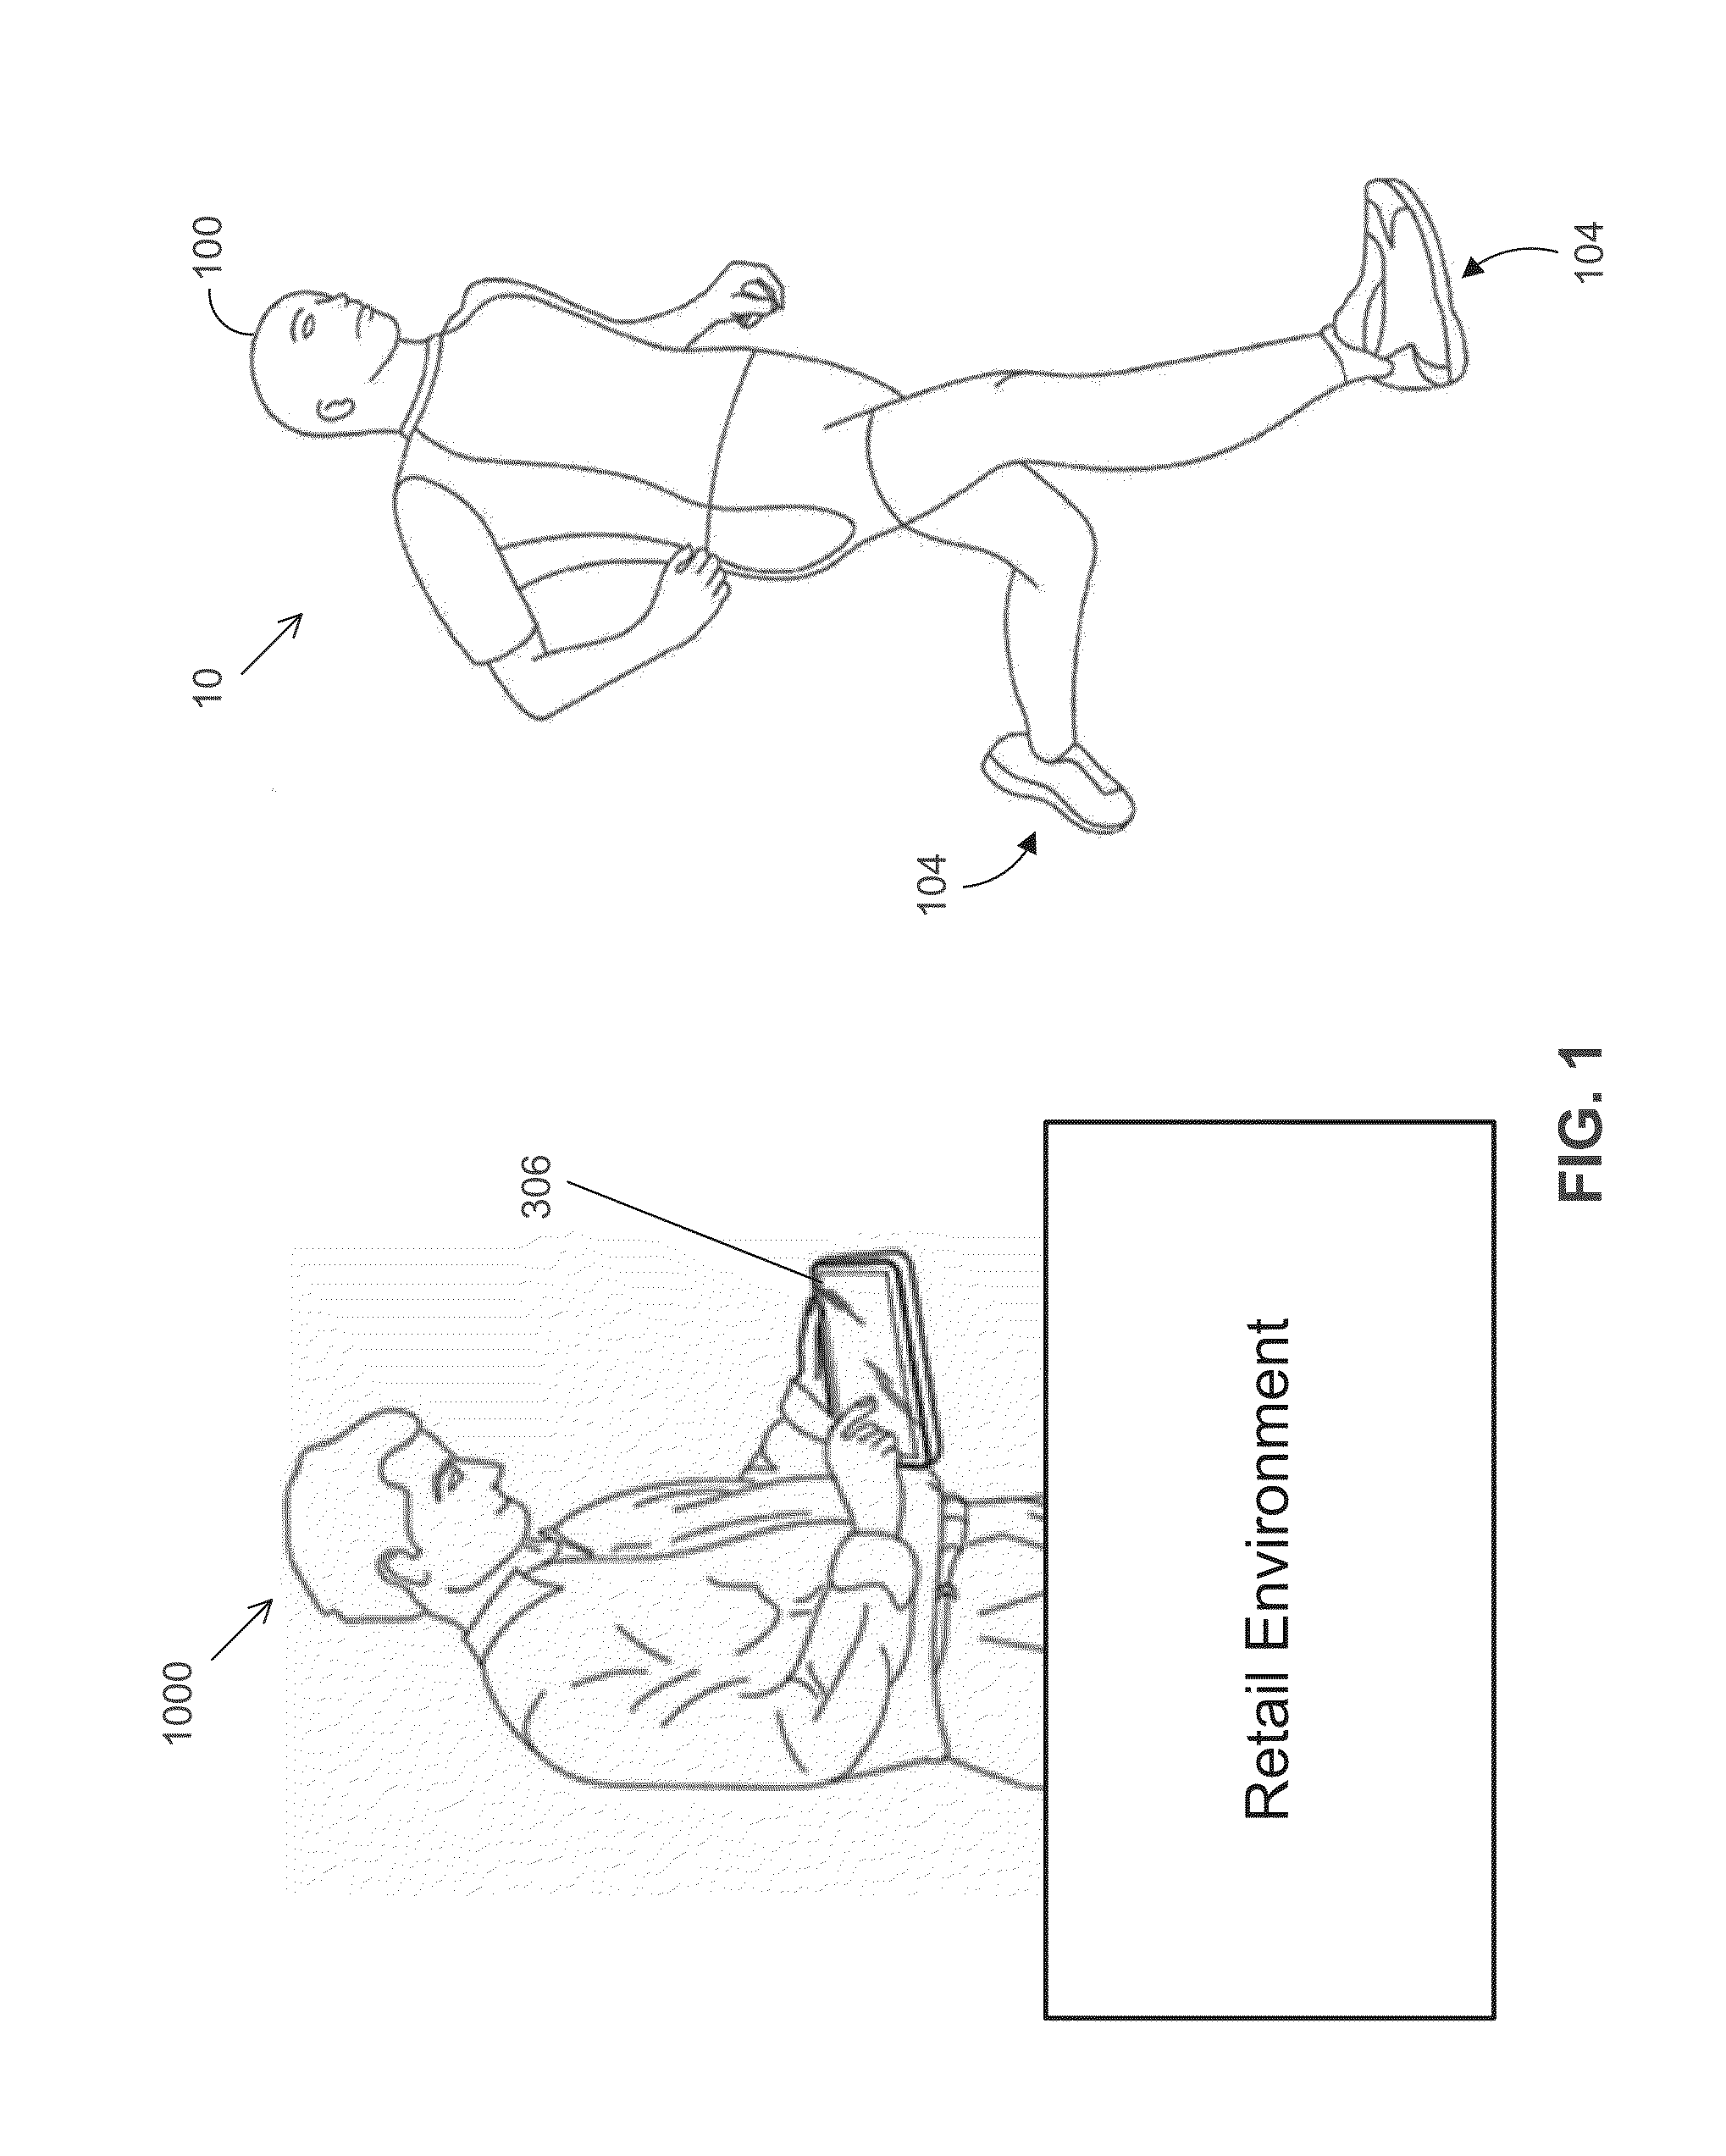 Retail store motion sensor systems and methods